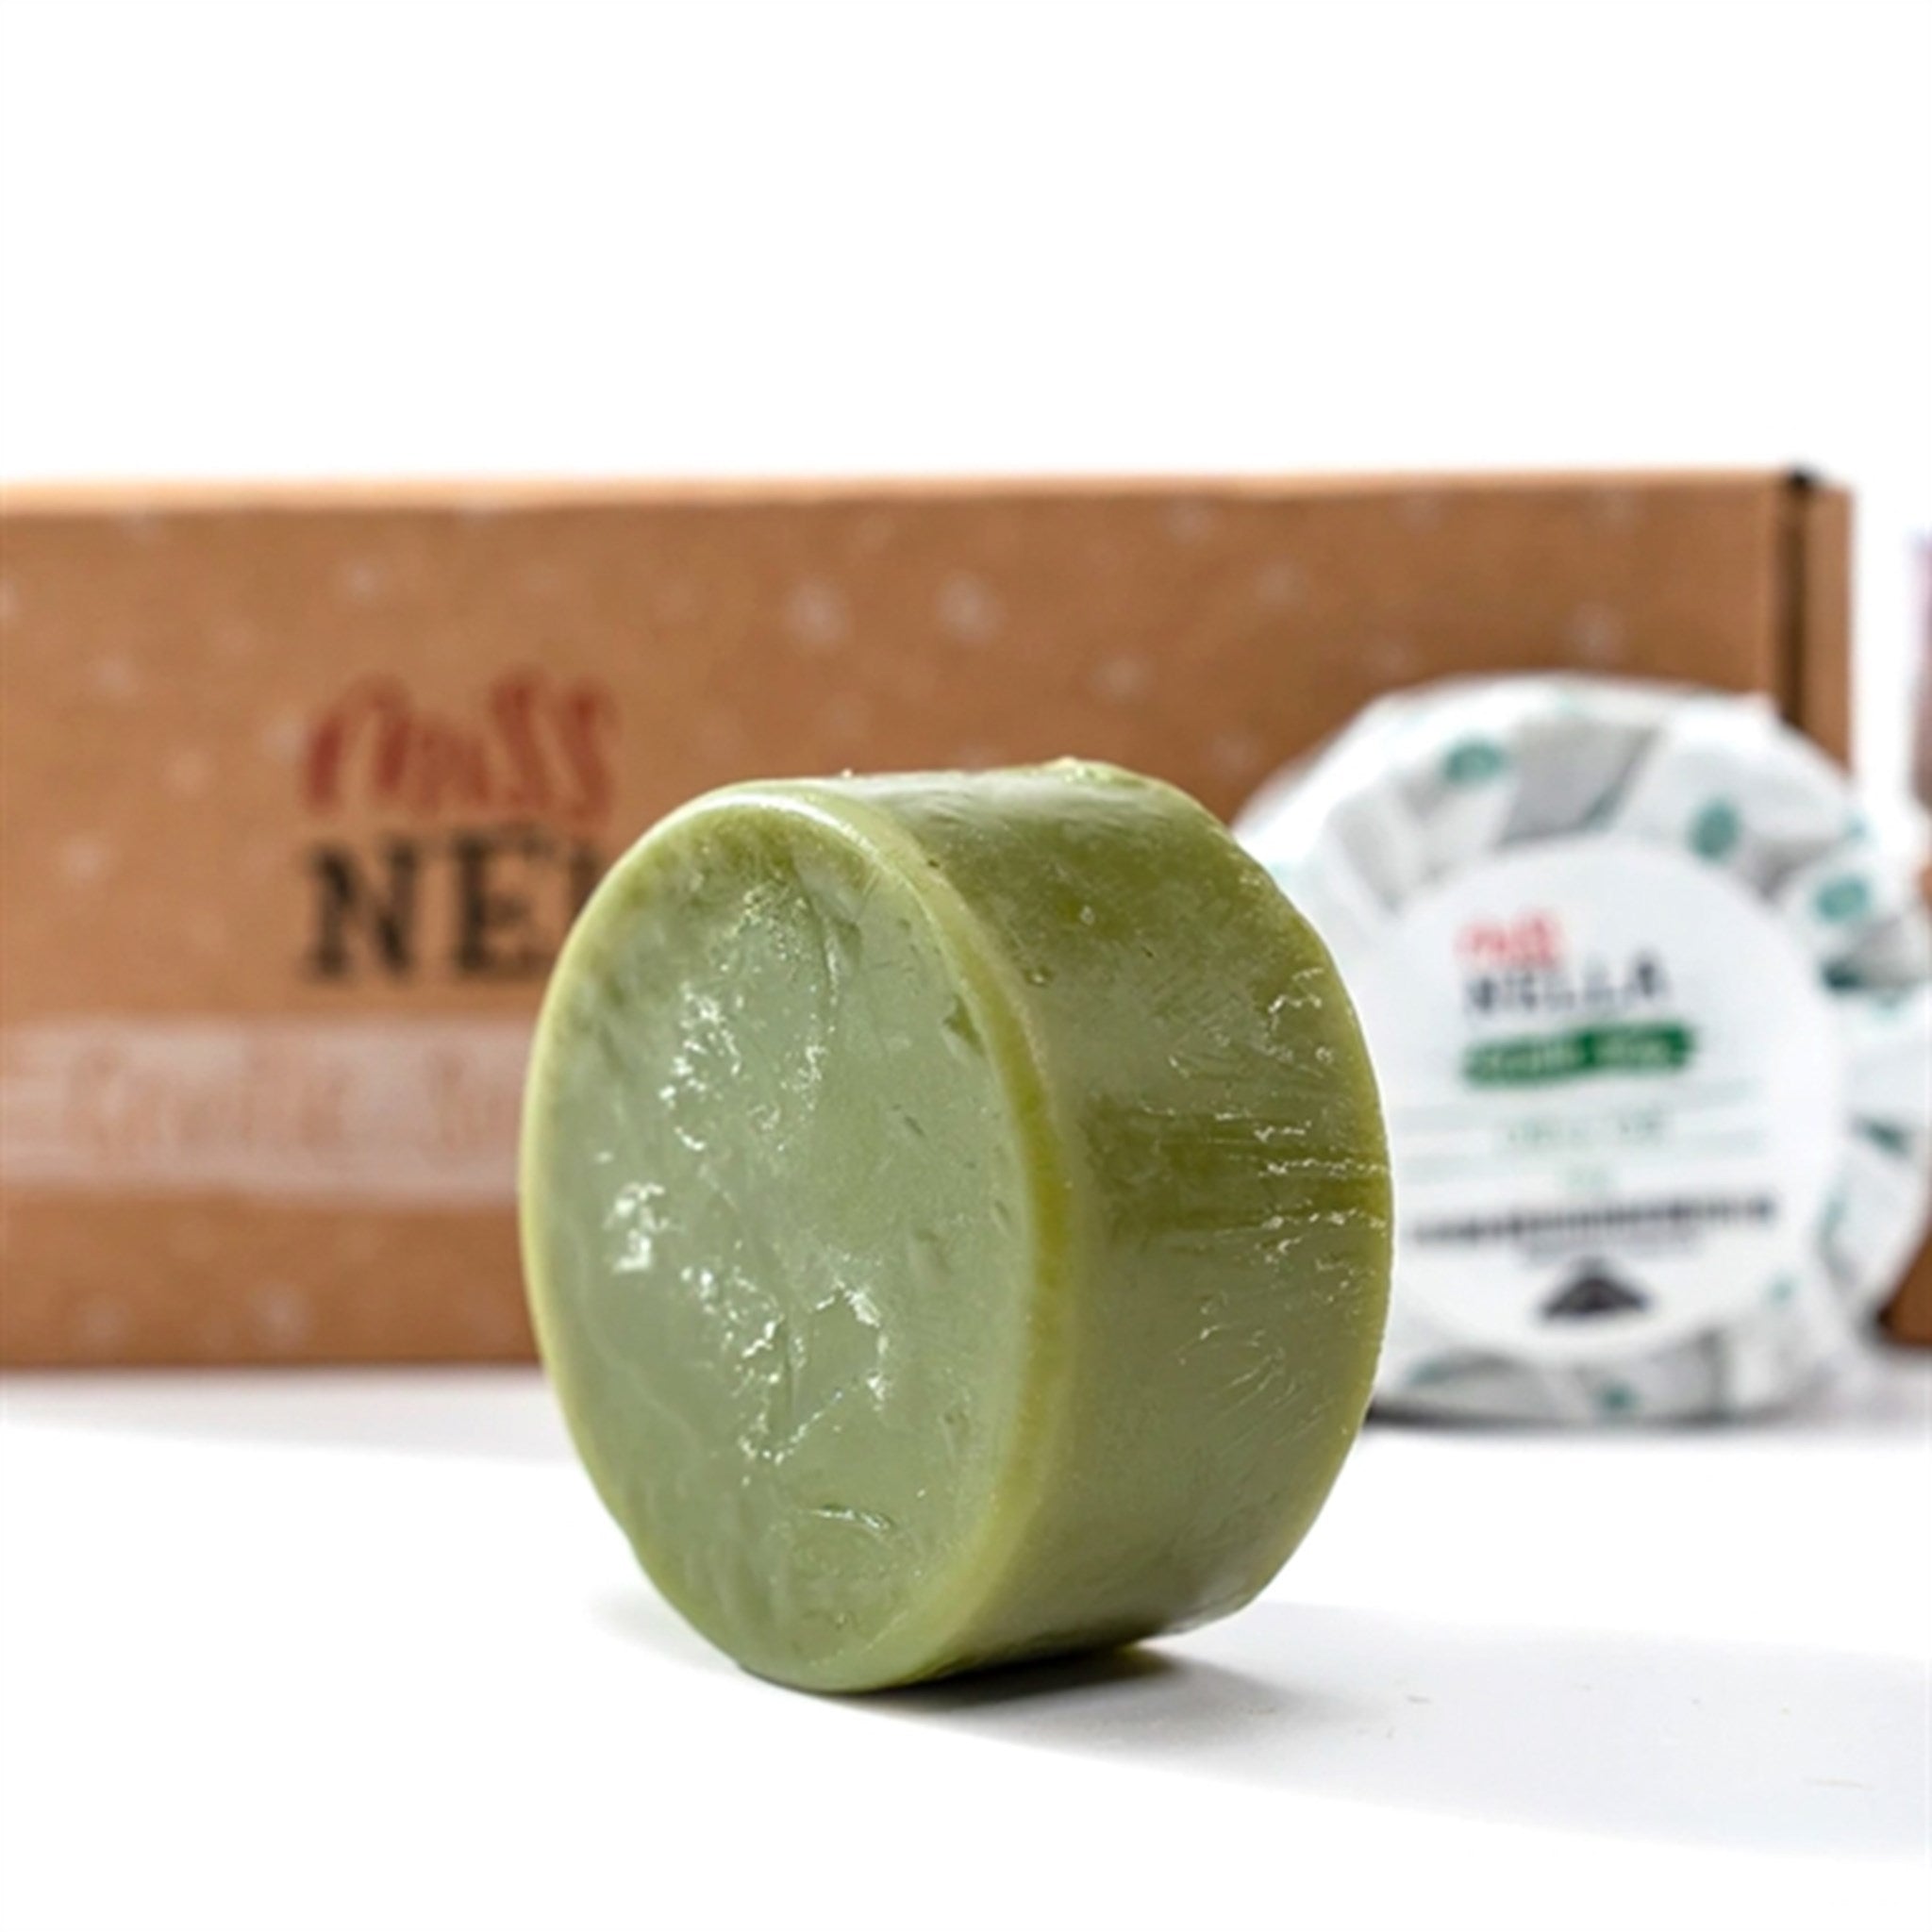 Miss Nella Gentle Soap 3-pack 3